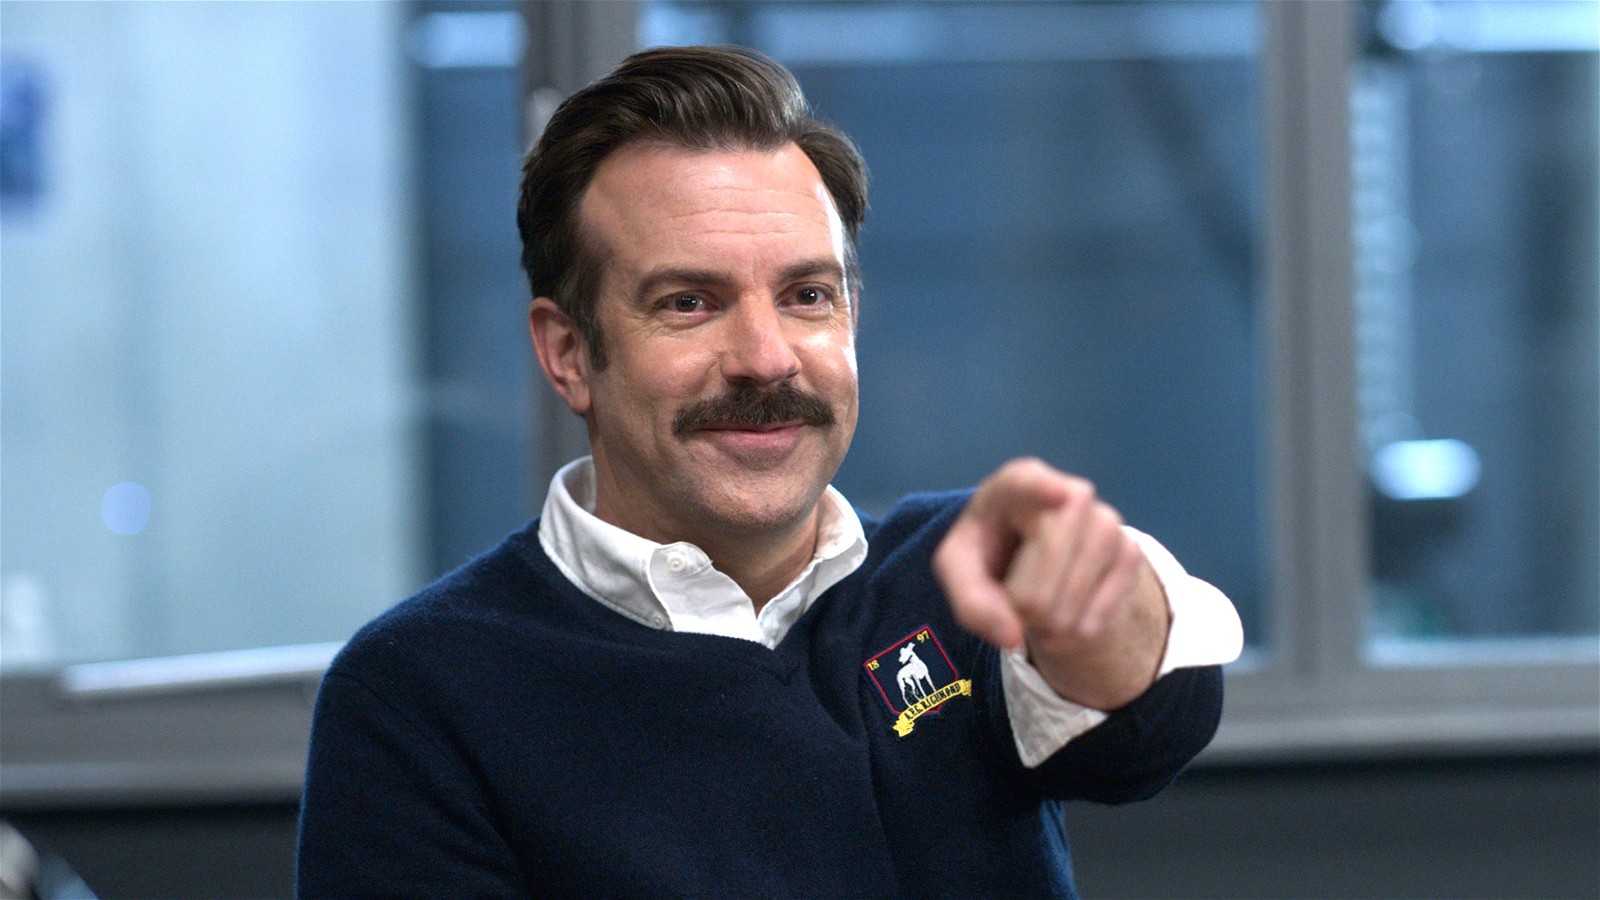 Jason Sudeikis is the lead actor in Ted Lasso (2020-).